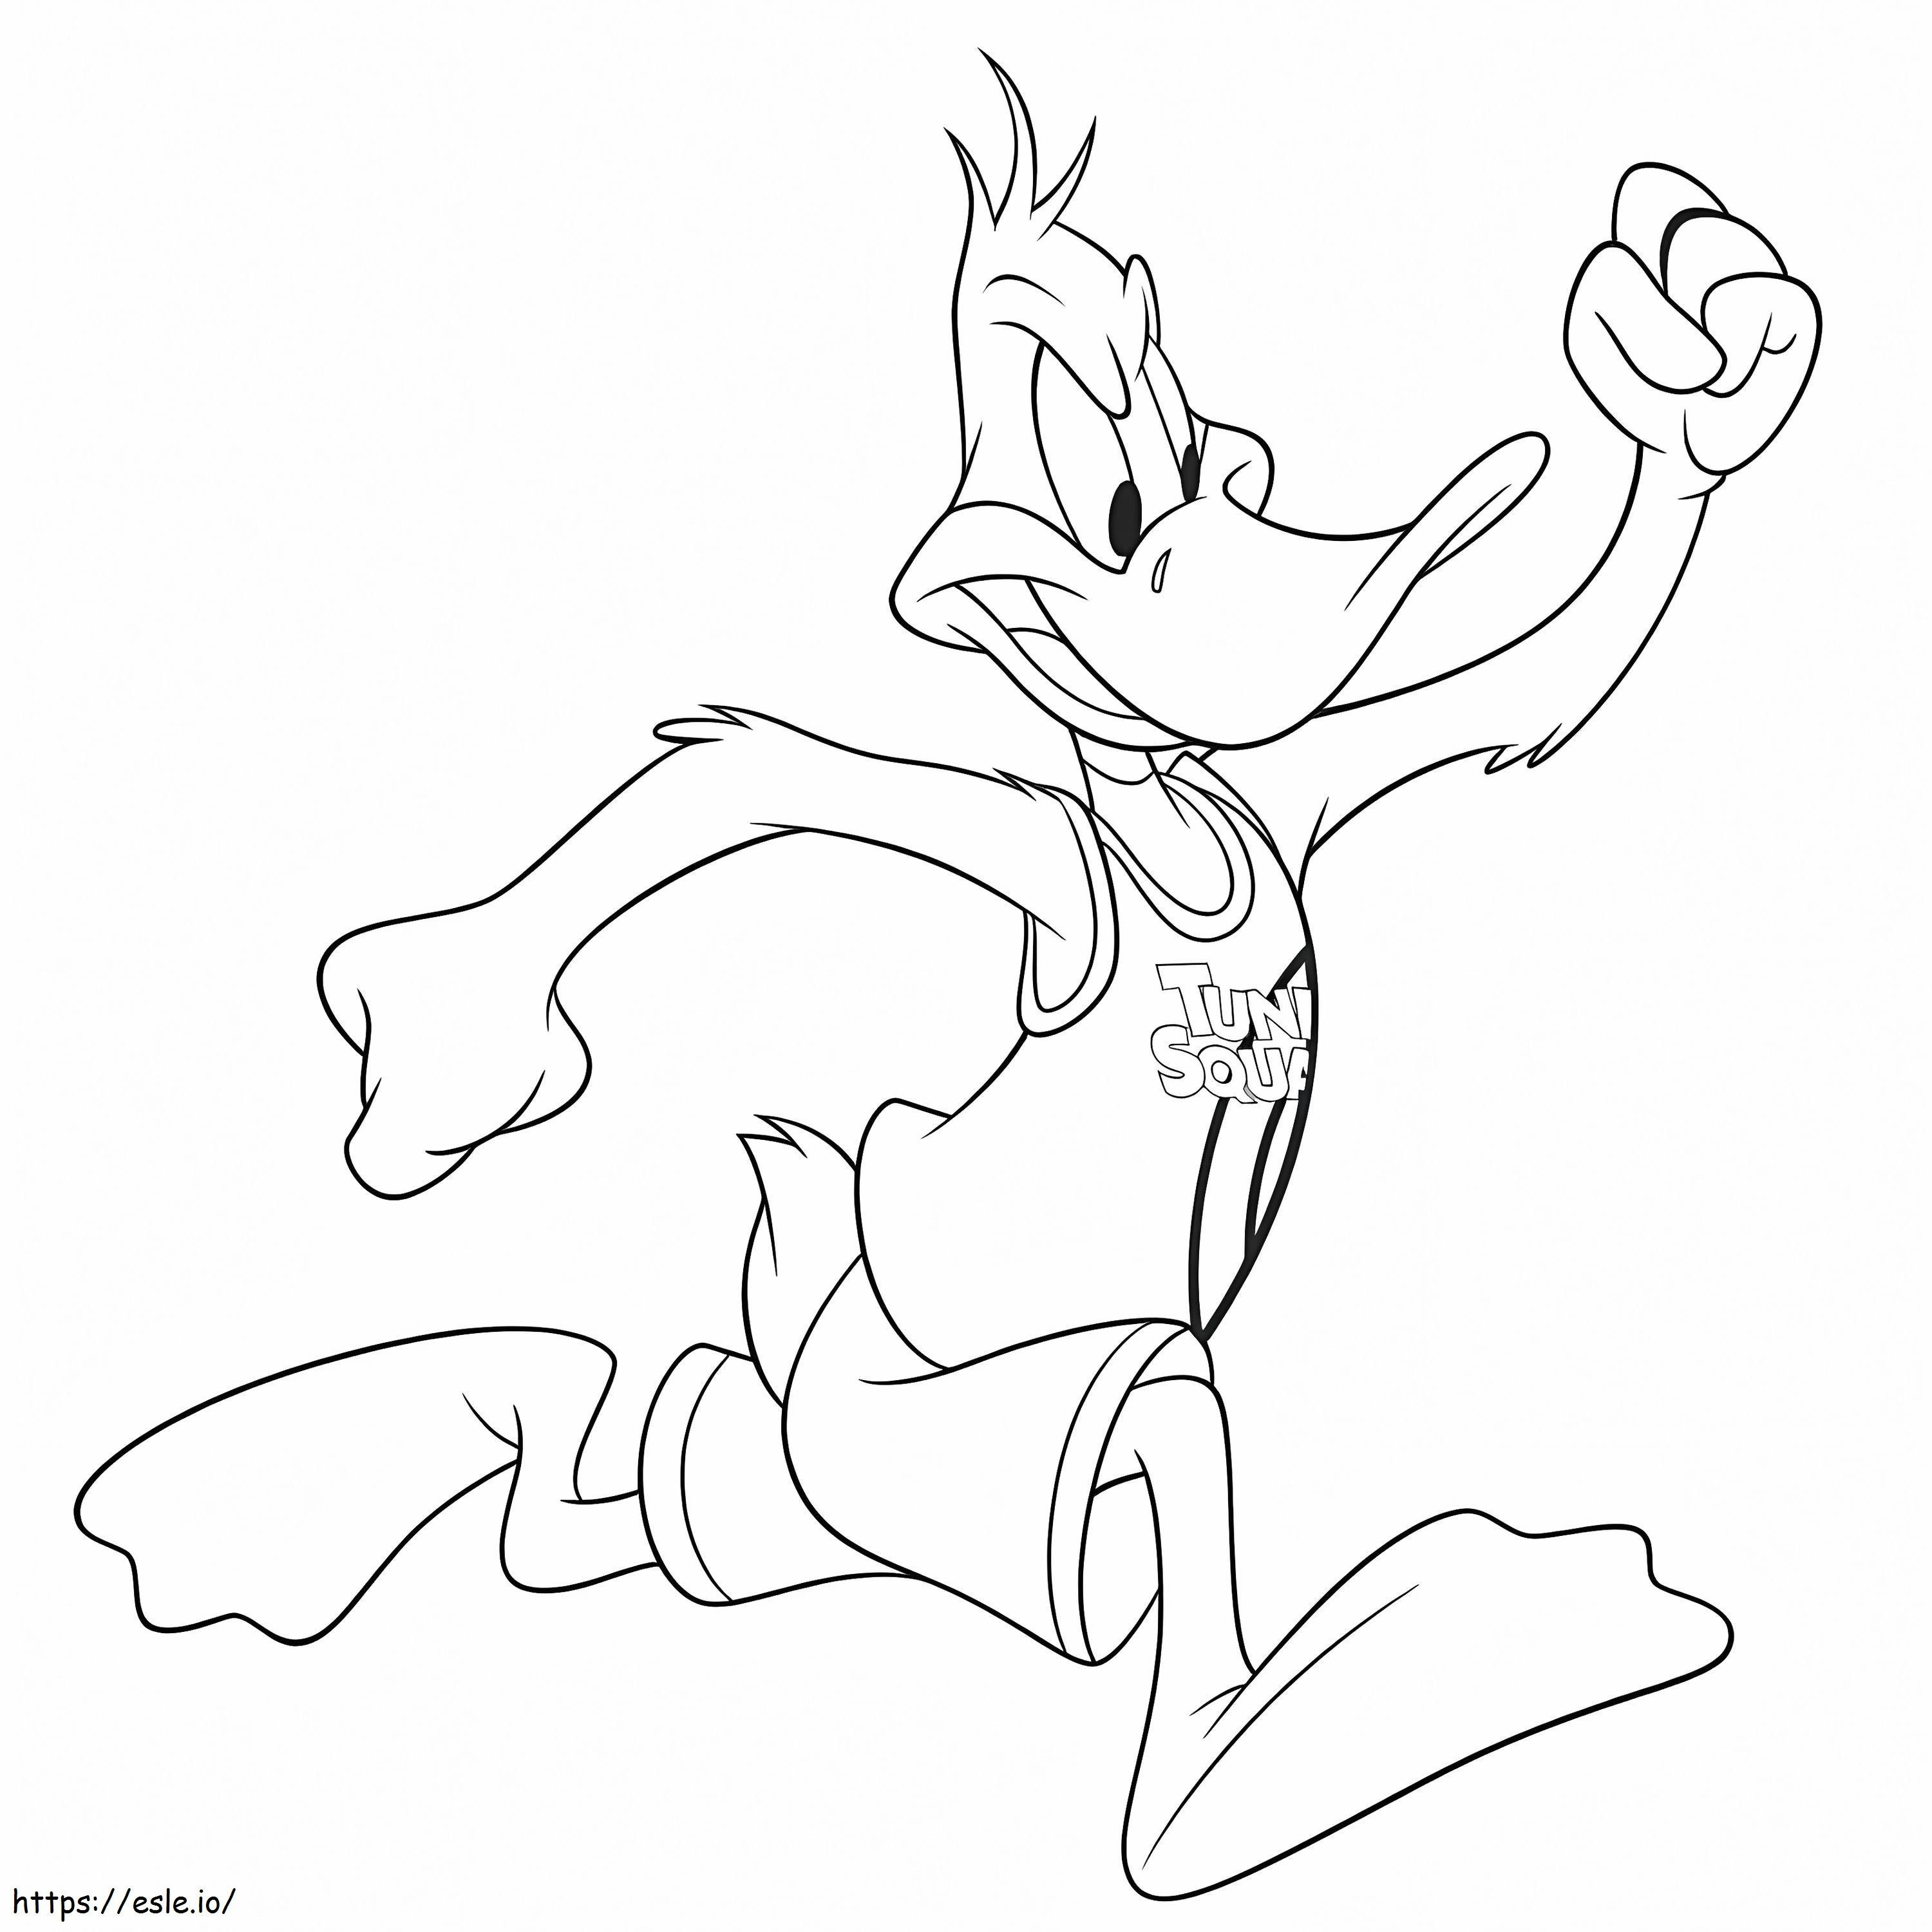 Space Jam Daffy Duck coloring page